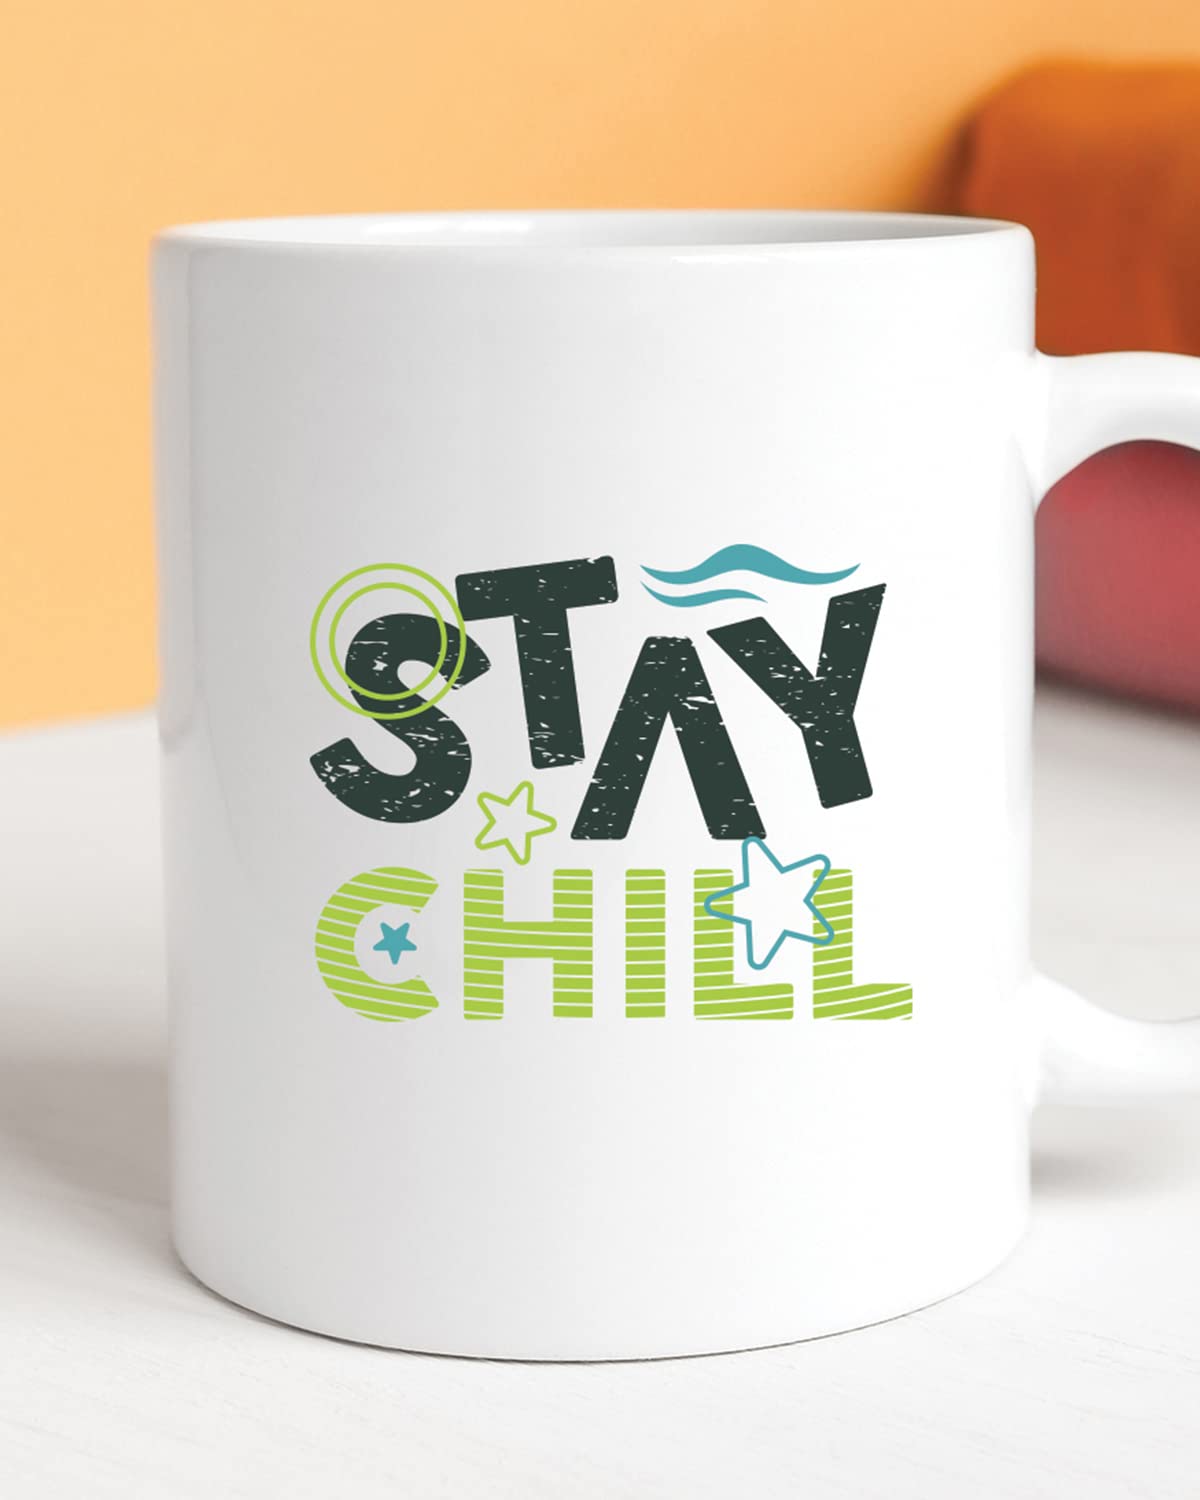 Stay CHILL Coffee Mug - Birthday Gift, Motivational Mug, Printed with Inspiring Quotes, Positivity Mug, Inspirational Gift for Him & Her, Best Friend Gift, Gifts for Her, Cheer Up Gift